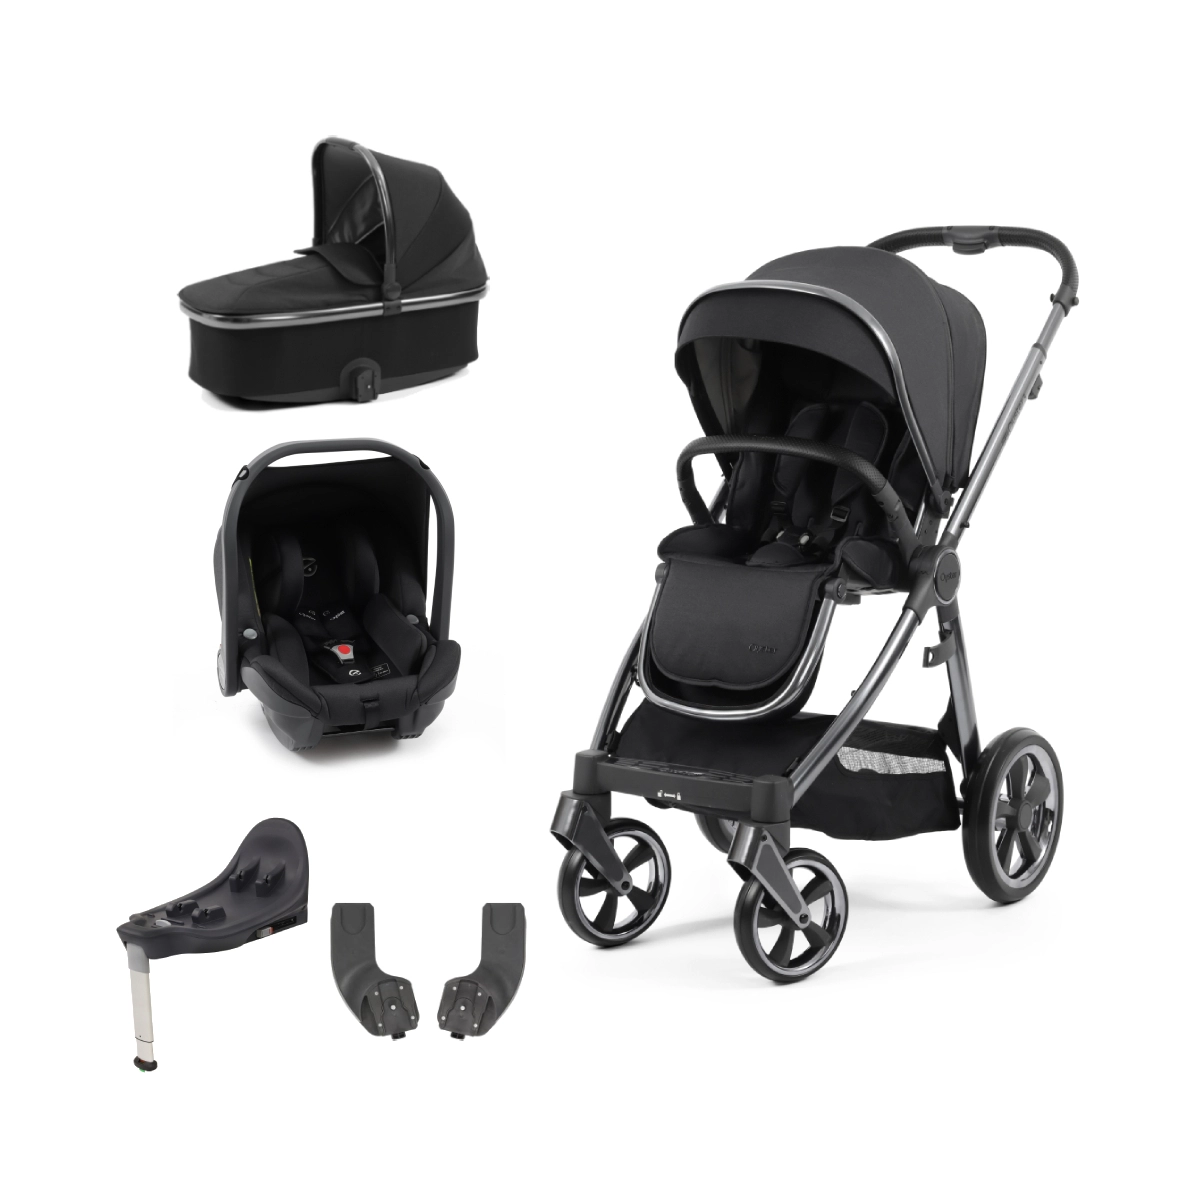 BabyStyle Oyster 3 Gun Metal Chassis Essential Capsule Travel System